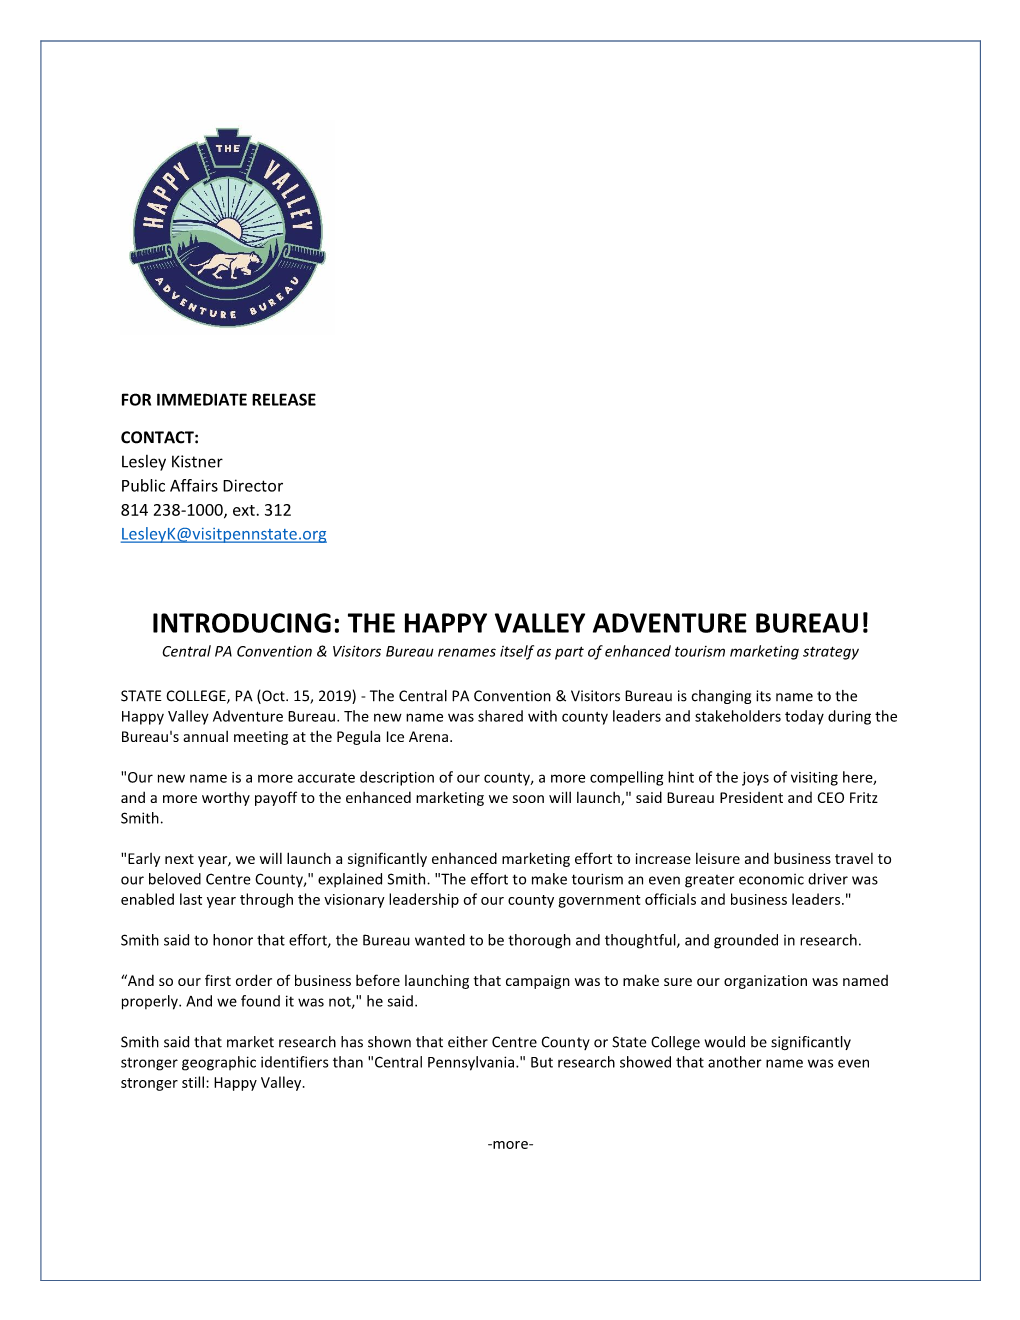 INTRODUCING: the HAPPY VALLEY ADVENTURE BUREAU! Central PA Convention & Visitors Bureau Renames Itself As Part of Enhanced Tourism Marketing Strategy